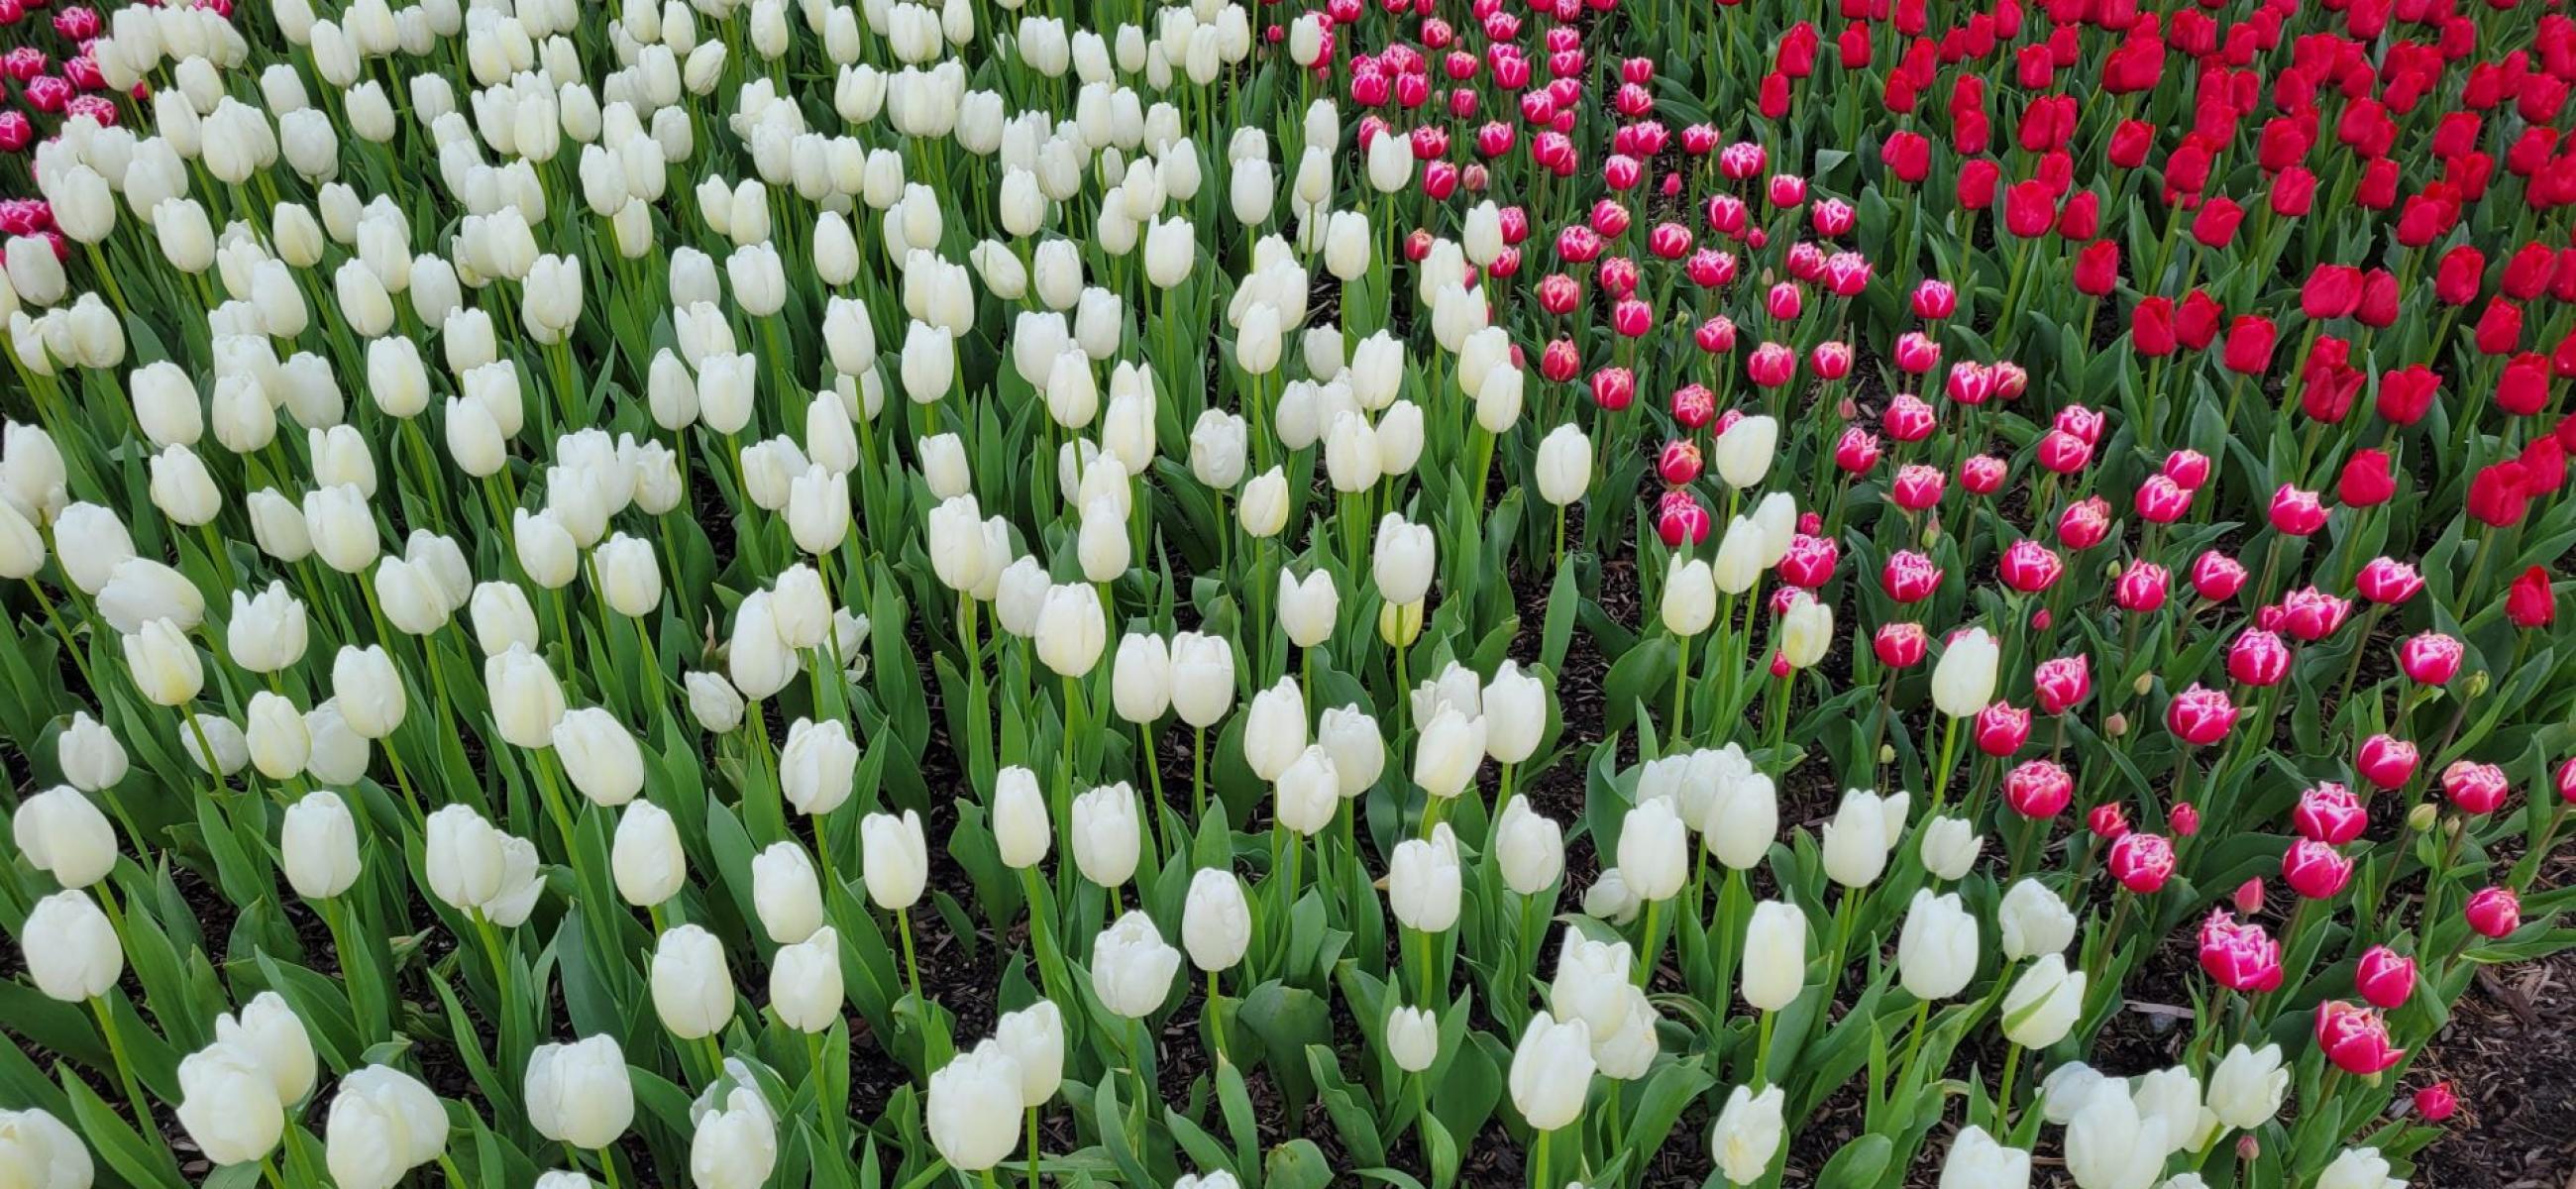 Endless rows of different-colored tulips curve to the right